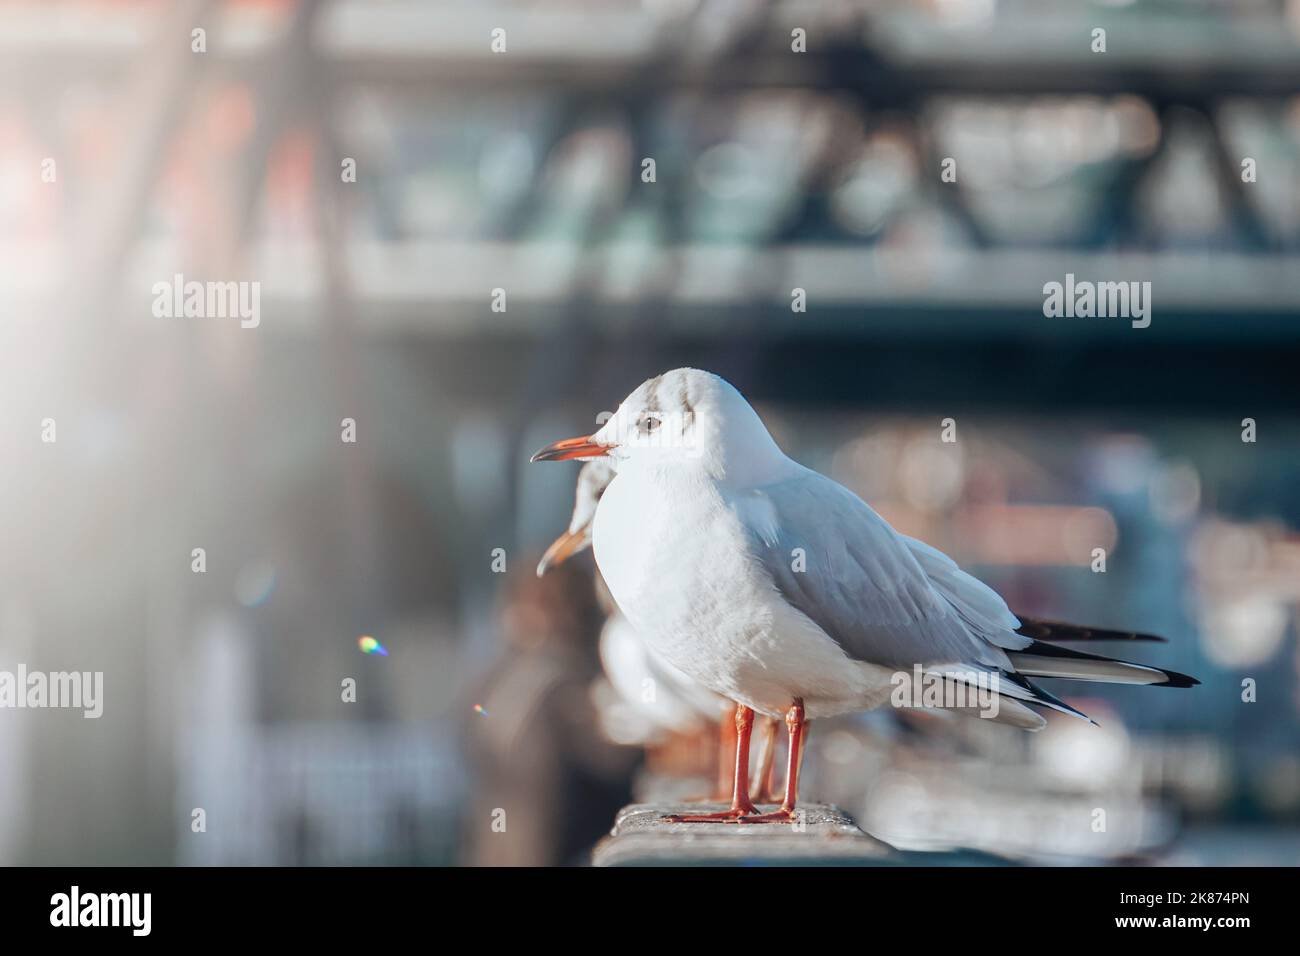 seagulls in the seaport, animal themes Stock Photo